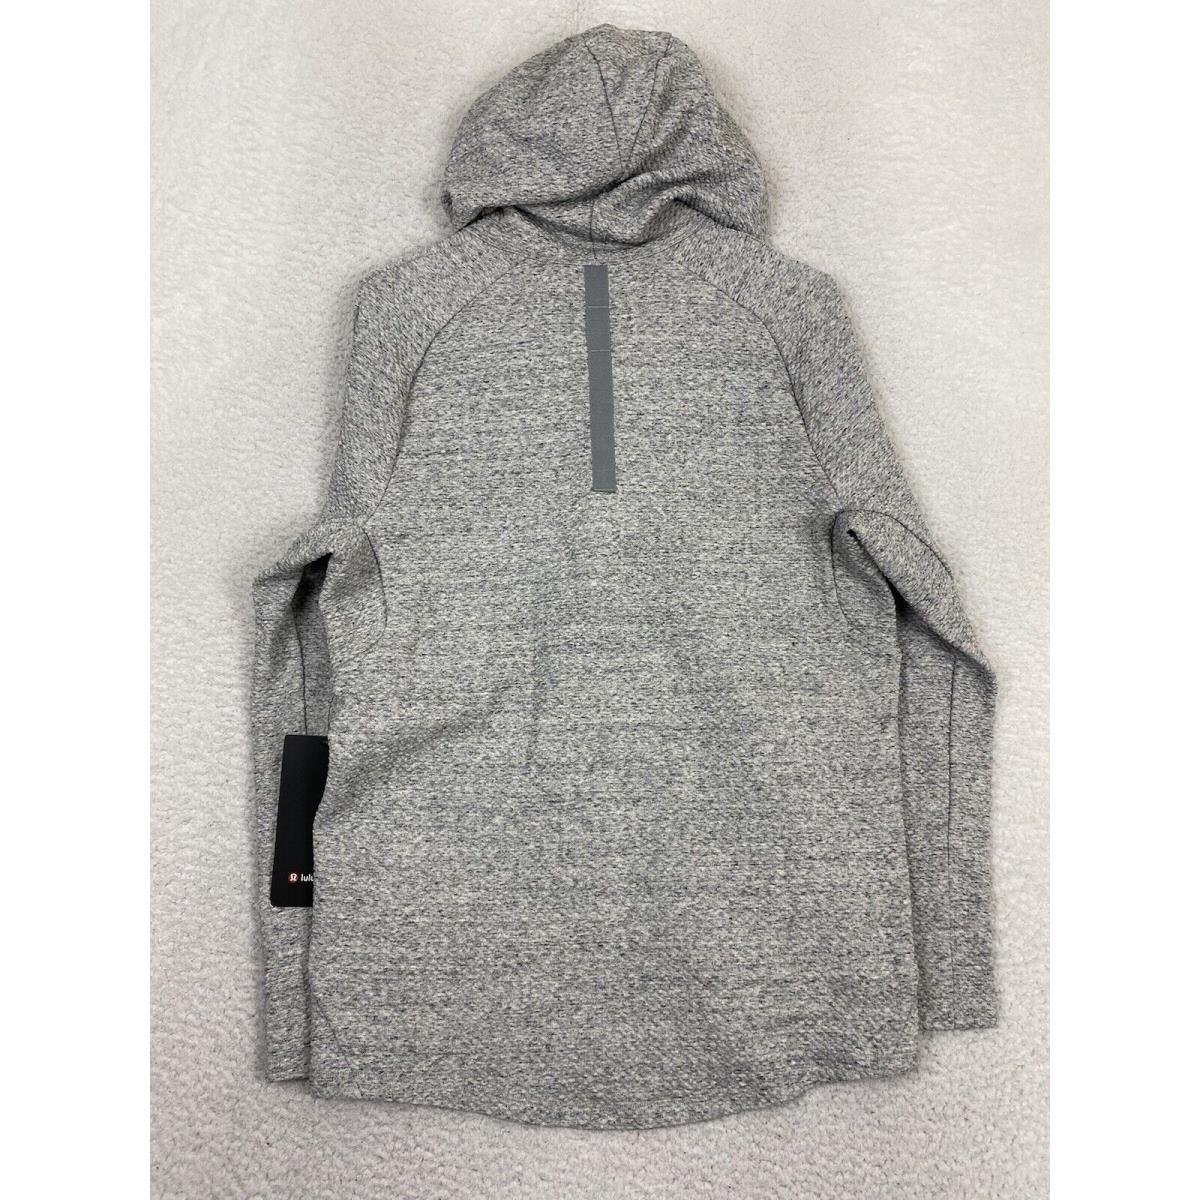 Lululemon At Ease Hoodie Textured Heathered Gray Hmel/blk Size Small